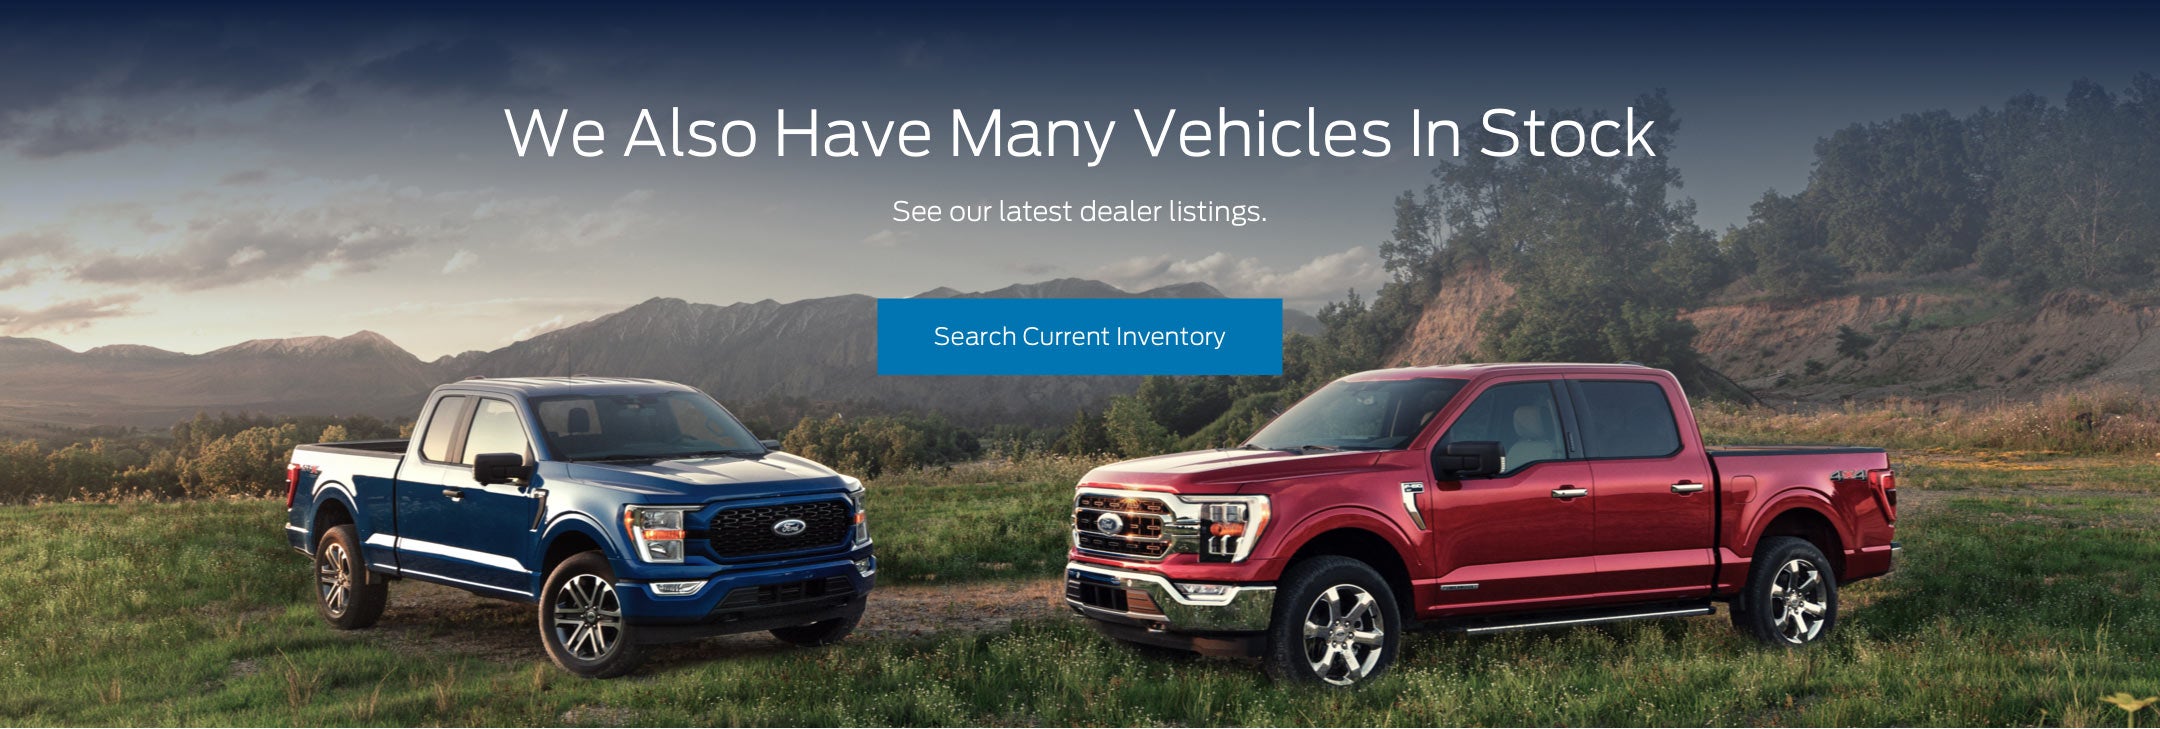 Ford vehicles in stock | Auffenberg Ford North in O'Fallon IL